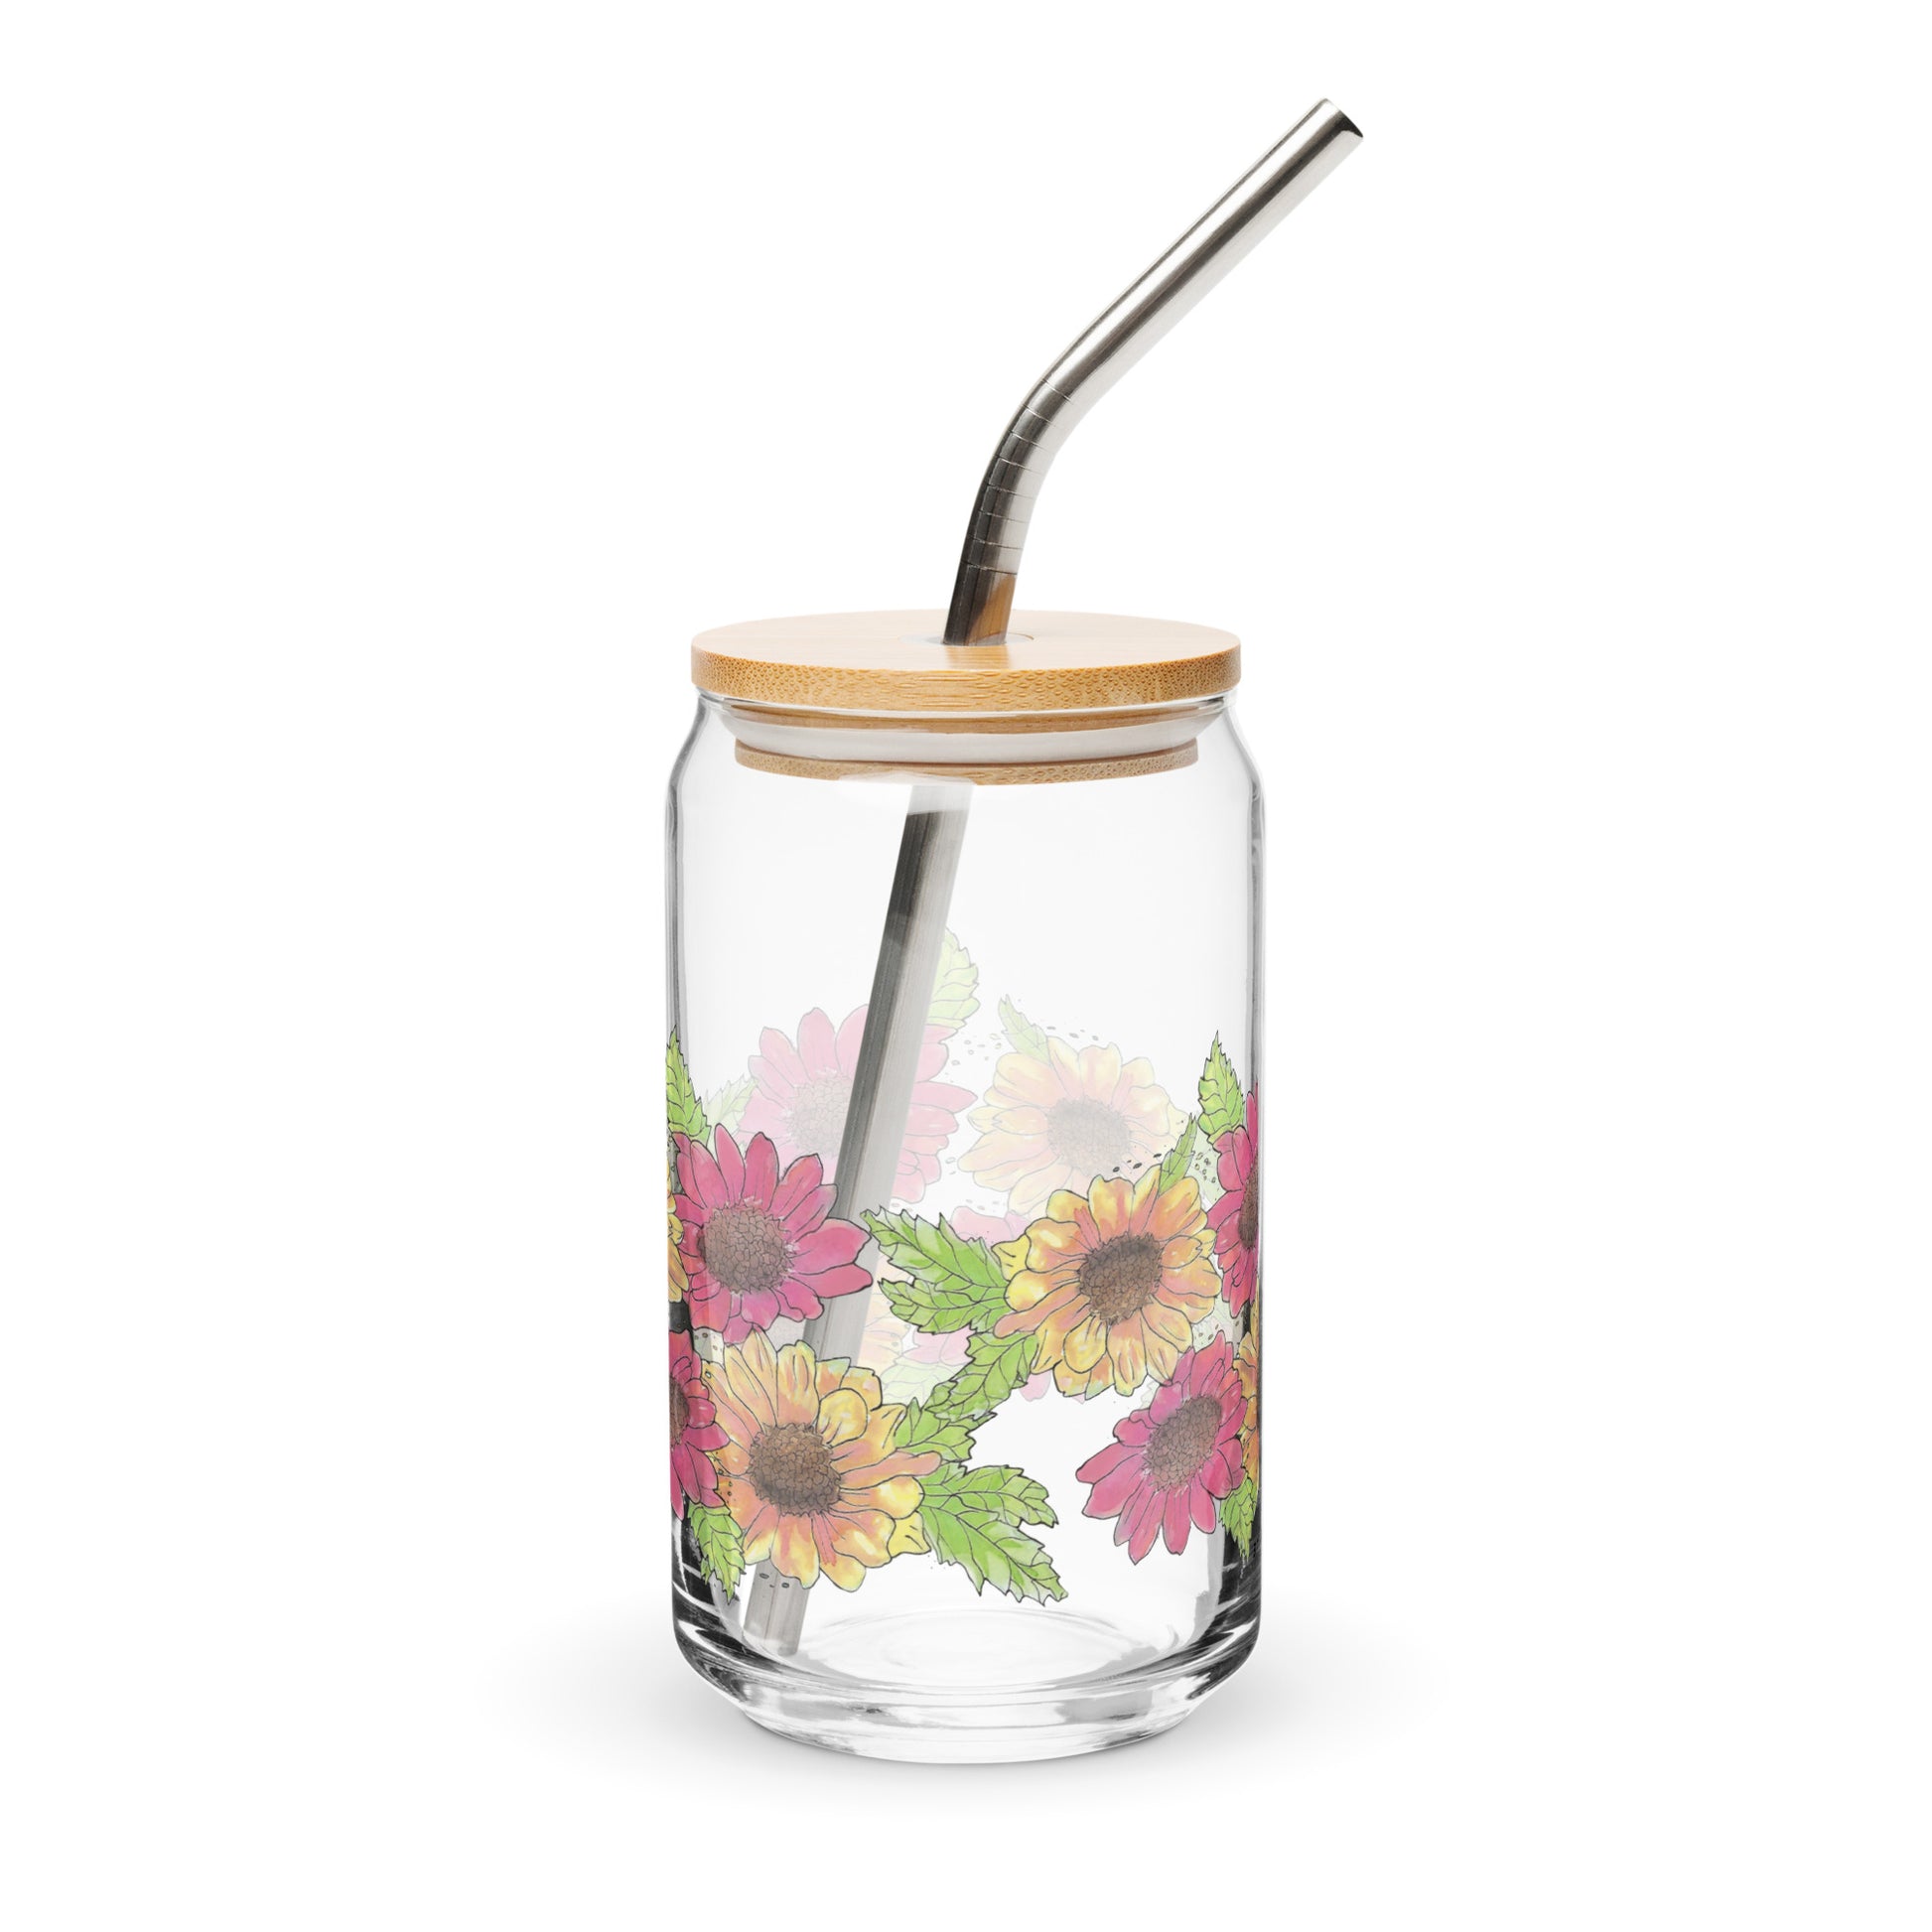 16 ounce can-shaped glass. Features wraparound print of watercolor Gerber daisies. Shown with bamboo lid and stainless steel straw.